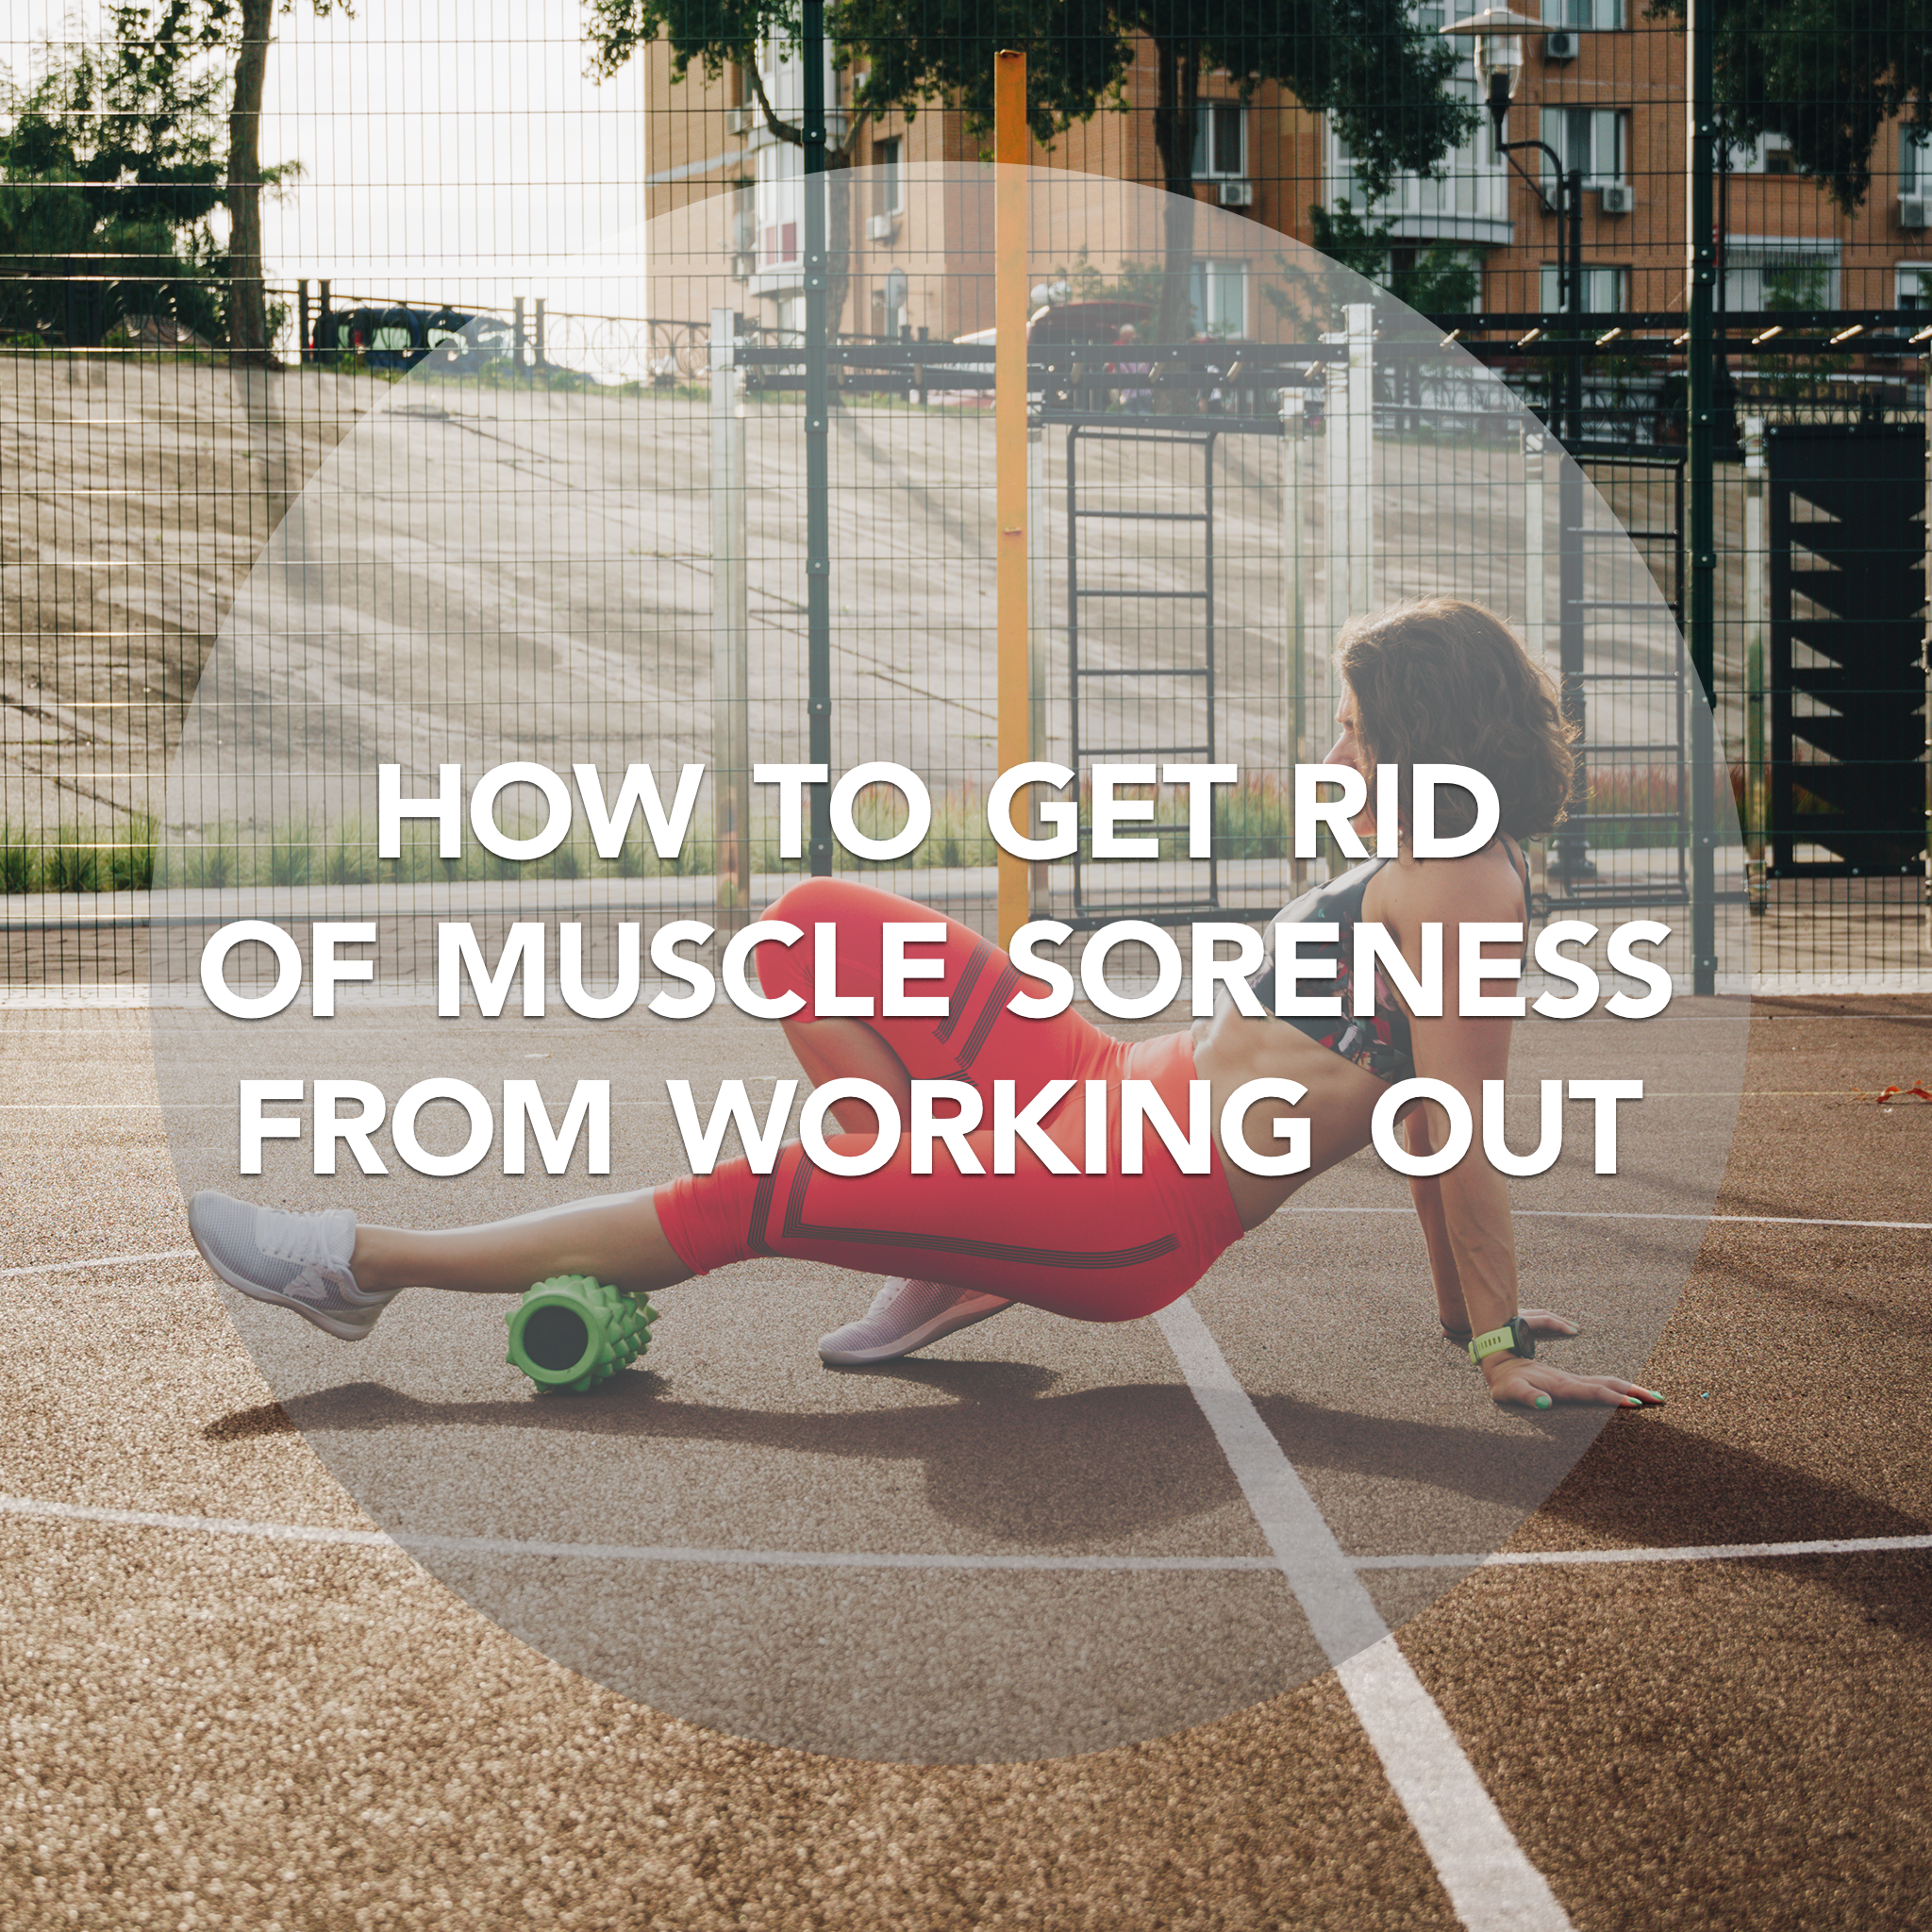 How to Get Rid of Muscle Soreness from Working Out